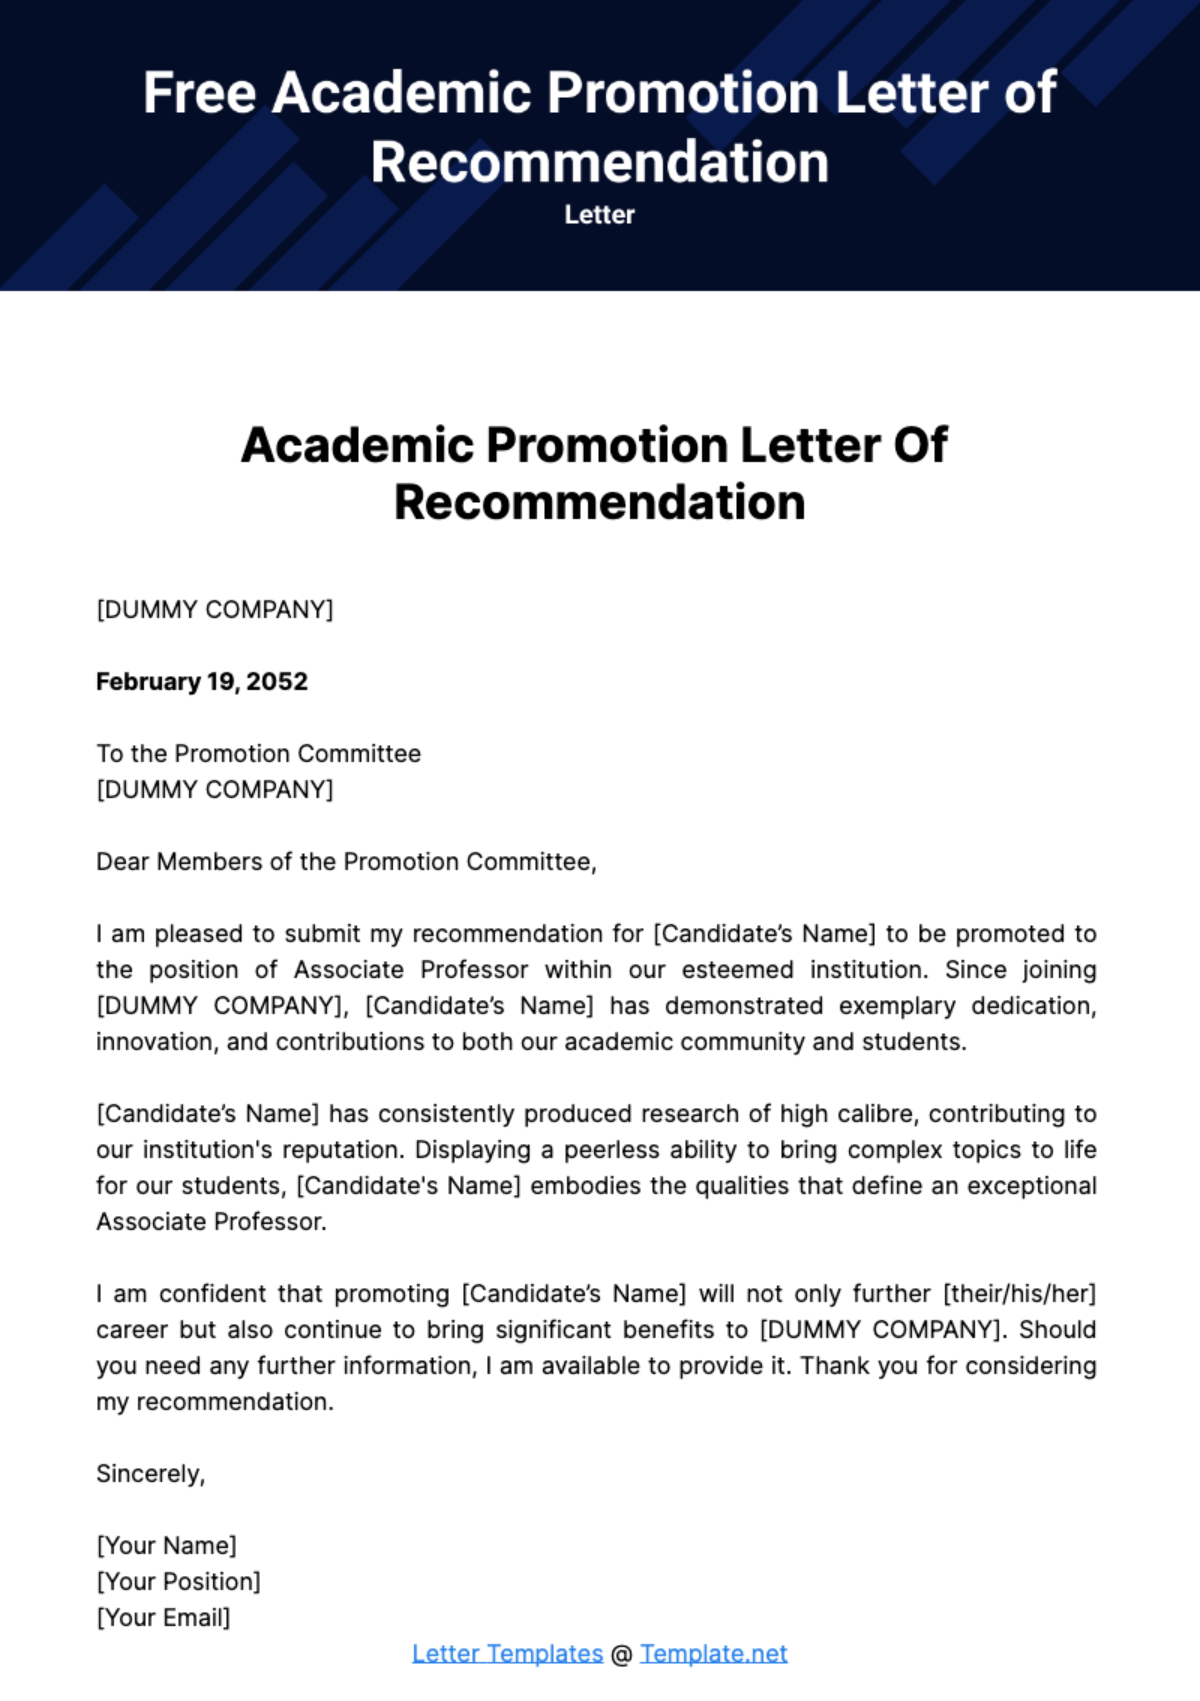 Free Academic Promotion Letter of Recommendation Template